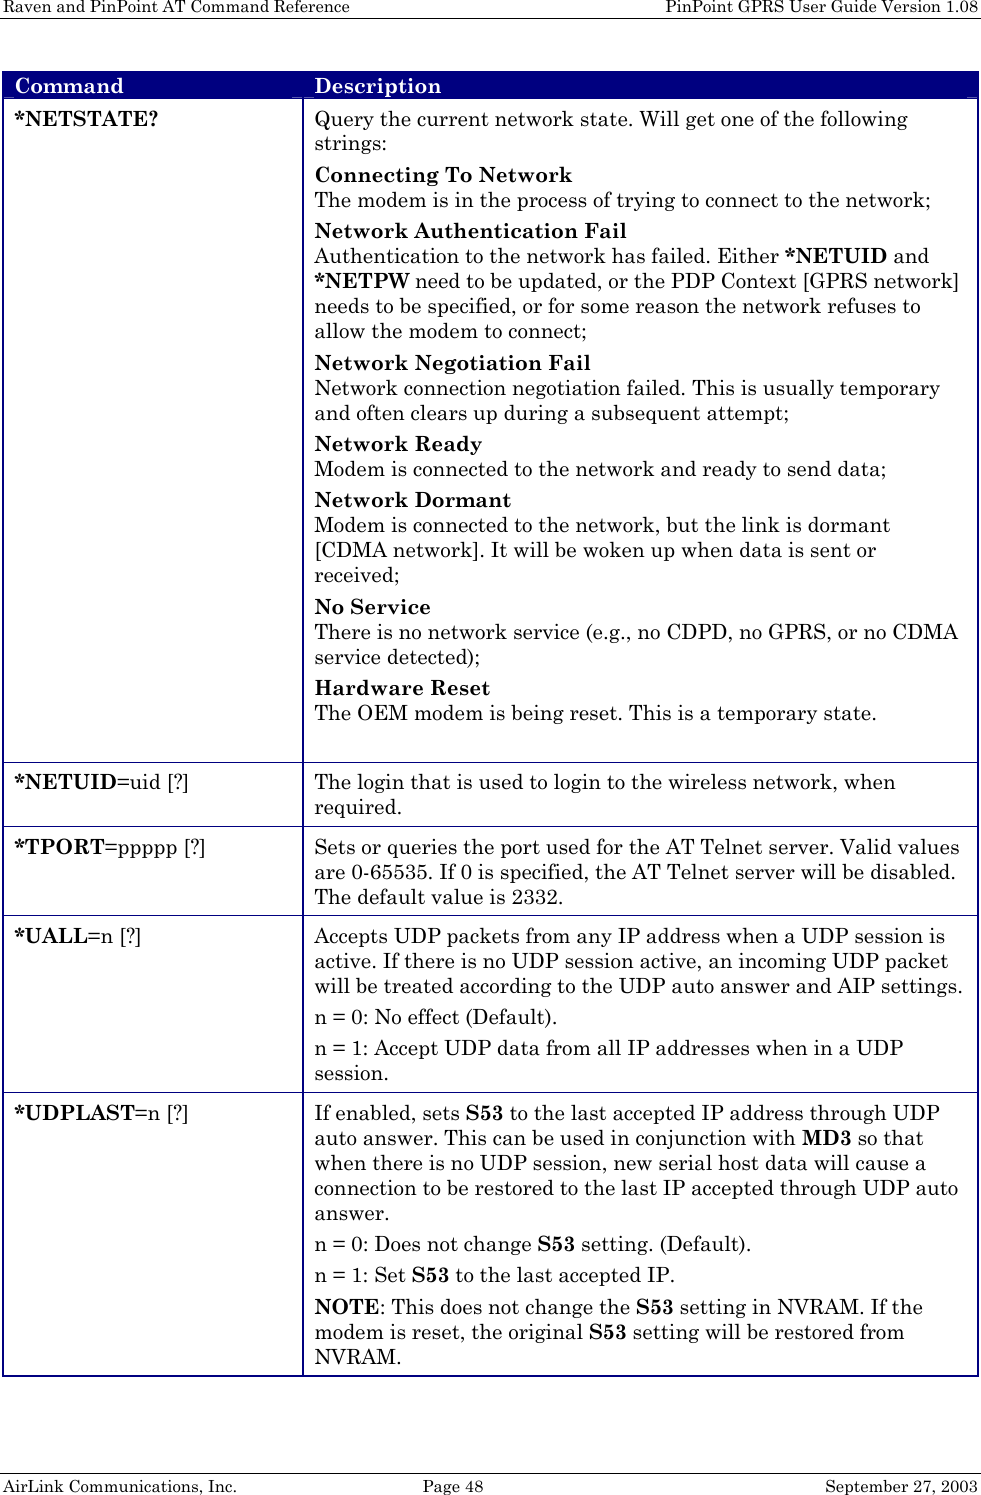 Raven and PinPoint AT Command Reference    PinPoint GPRS User Guide Version 1.08 AirLink Communications, Inc.  Page 48  September 27, 2003 Command Description *NETSTATE? Query the current network state. Will get one of the following strings: Connecting To Network The modem is in the process of trying to connect to the network; Network Authentication Fail Authentication to the network has failed. Either *NETUID and *NETPW need to be updated, or the PDP Context [GPRS network] needs to be specified, or for some reason the network refuses to allow the modem to connect; Network Negotiation Fail Network connection negotiation failed. This is usually temporary and often clears up during a subsequent attempt; Network Ready Modem is connected to the network and ready to send data; Network Dormant Modem is connected to the network, but the link is dormant [CDMA network]. It will be woken up when data is sent or received; No Service There is no network service (e.g., no CDPD, no GPRS, or no CDMA service detected); Hardware Reset The OEM modem is being reset. This is a temporary state.  *NETUID=uid [?] The login that is used to login to the wireless network, when required. *TPORT=ppppp [?] Sets or queries the port used for the AT Telnet server. Valid values are 0-65535. If 0 is specified, the AT Telnet server will be disabled. The default value is 2332. *UALL=n [?] Accepts UDP packets from any IP address when a UDP session is active. If there is no UDP session active, an incoming UDP packet will be treated according to the UDP auto answer and AIP settings. n = 0: No effect (Default). n = 1: Accept UDP data from all IP addresses when in a UDP session.  *UDPLAST=n [?] If enabled, sets S53 to the last accepted IP address through UDP auto answer. This can be used in conjunction with MD3 so that when there is no UDP session, new serial host data will cause a connection to be restored to the last IP accepted through UDP auto answer. n = 0: Does not change S53 setting. (Default). n = 1: Set S53 to the last accepted IP. NOTE: This does not change the S53 setting in NVRAM. If the modem is reset, the original S53 setting will be restored from NVRAM. 